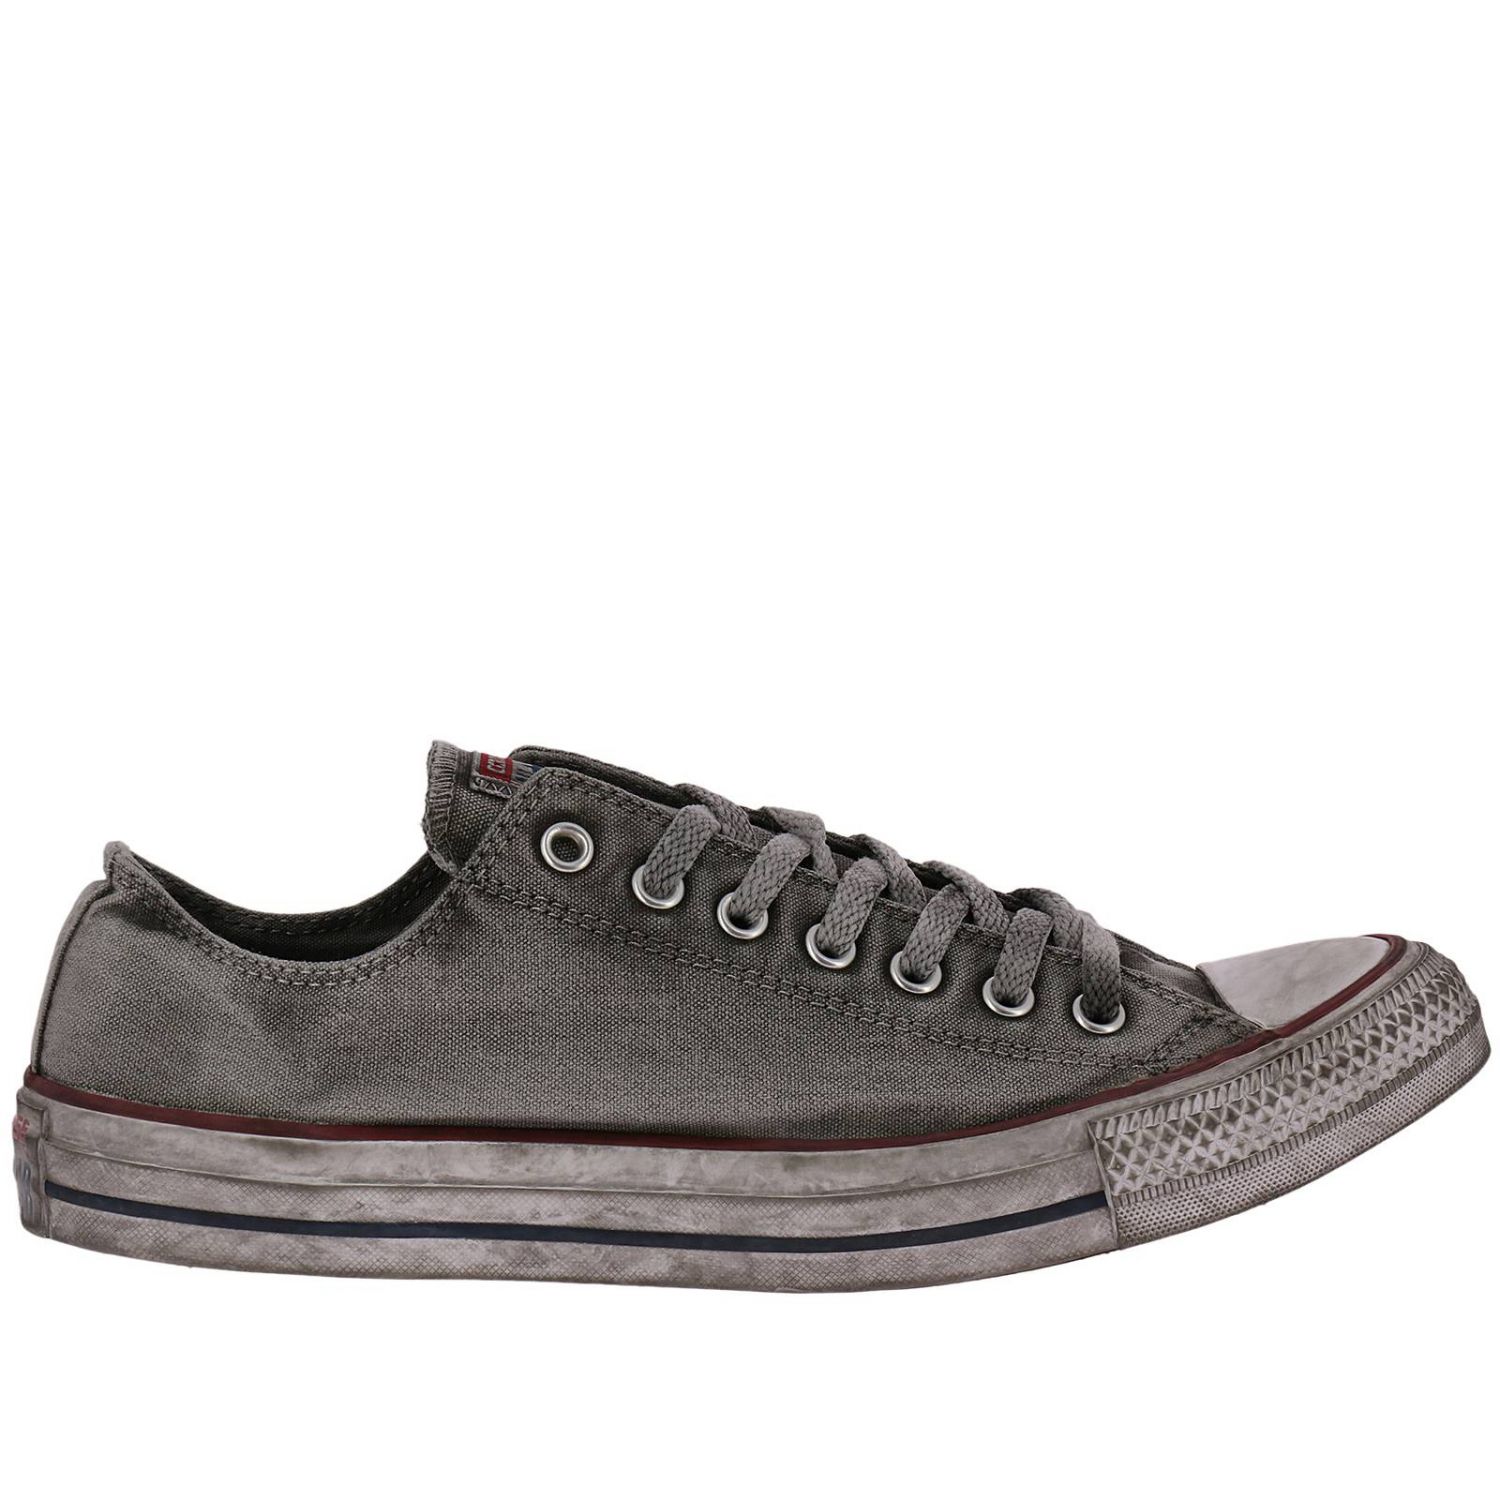 Sneakers All Star Limited Edition in canvas con suola effetto sporco |  Sneakers Converse Limited Edition Uomo Grigio | Sneakers Converse Limited  Edition 156892C Giglio IT